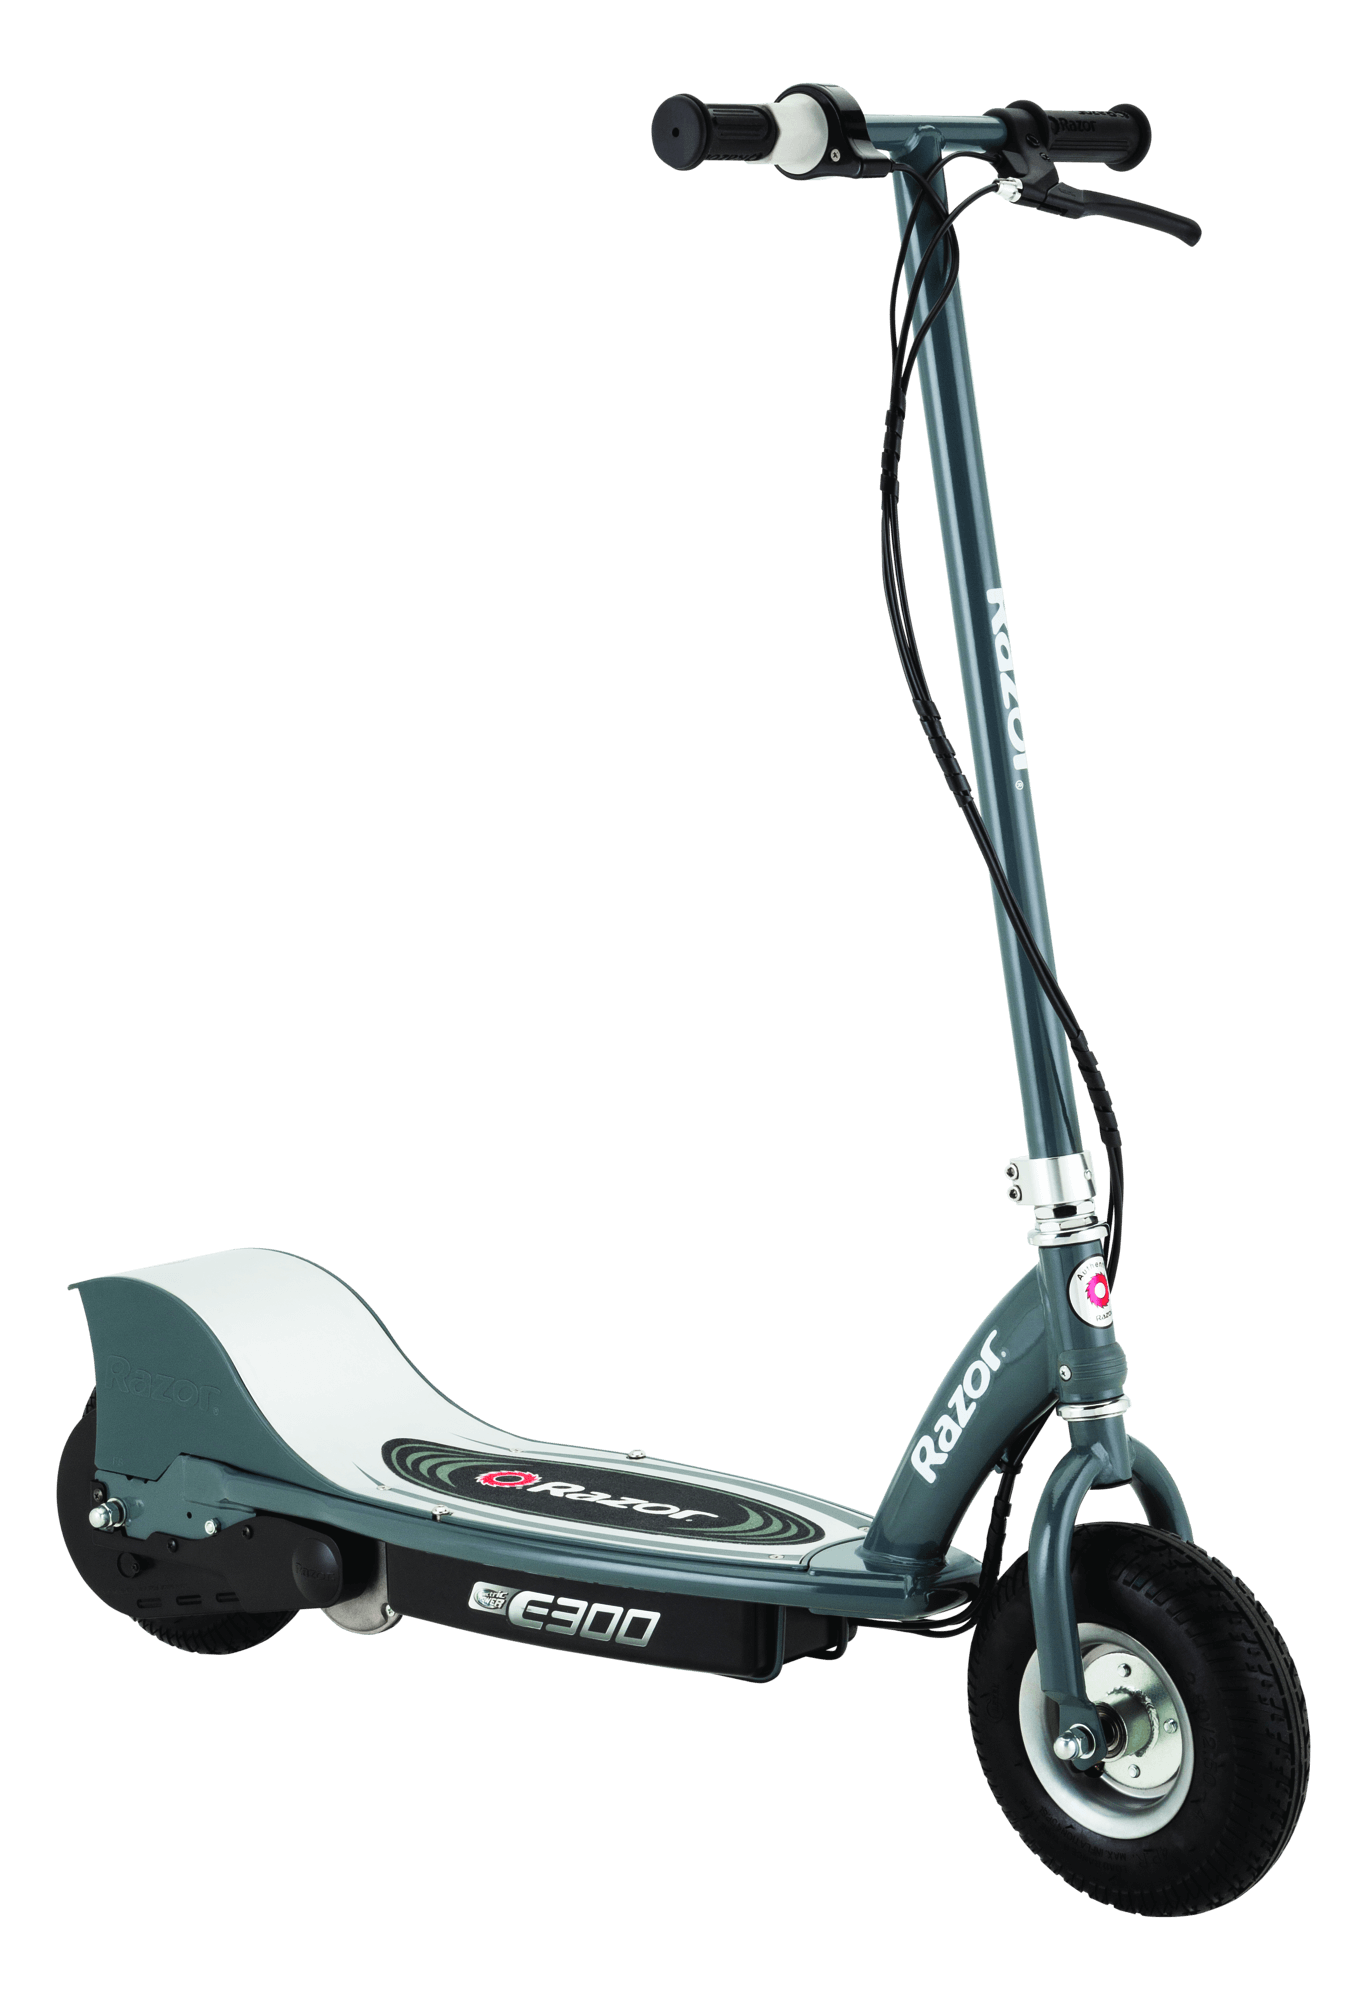 Razor E300 Electric Scooter Battery Life See More On Silenttool Wohohoo